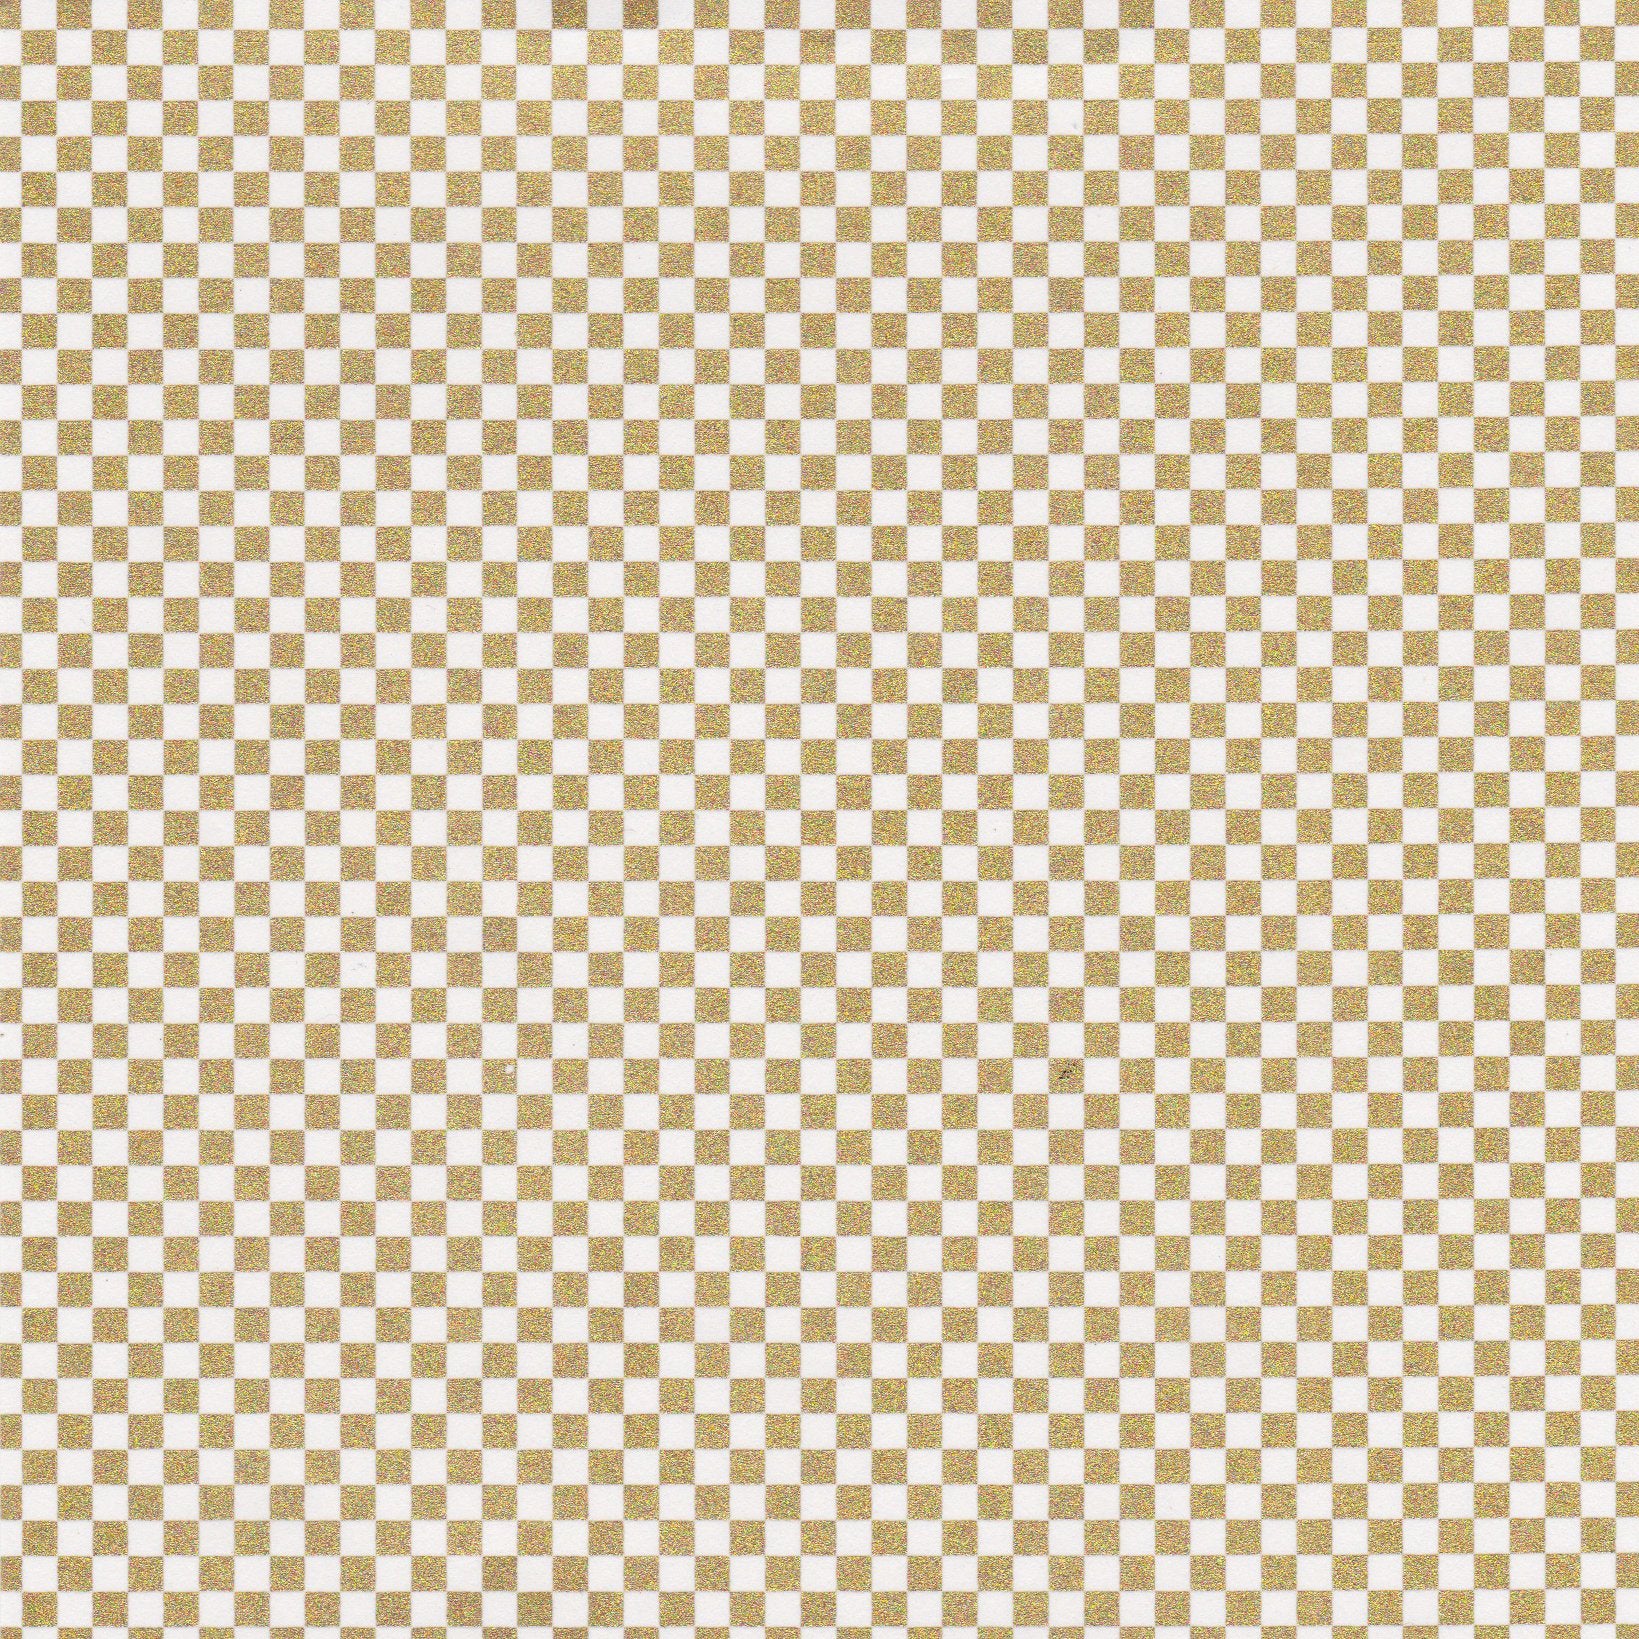 Pack of 20 Sheets 14x14cm Yuzen Washi Origami Paper HZ-051 - Gold Checkerboard (S) - washi paper - Lavender Home London